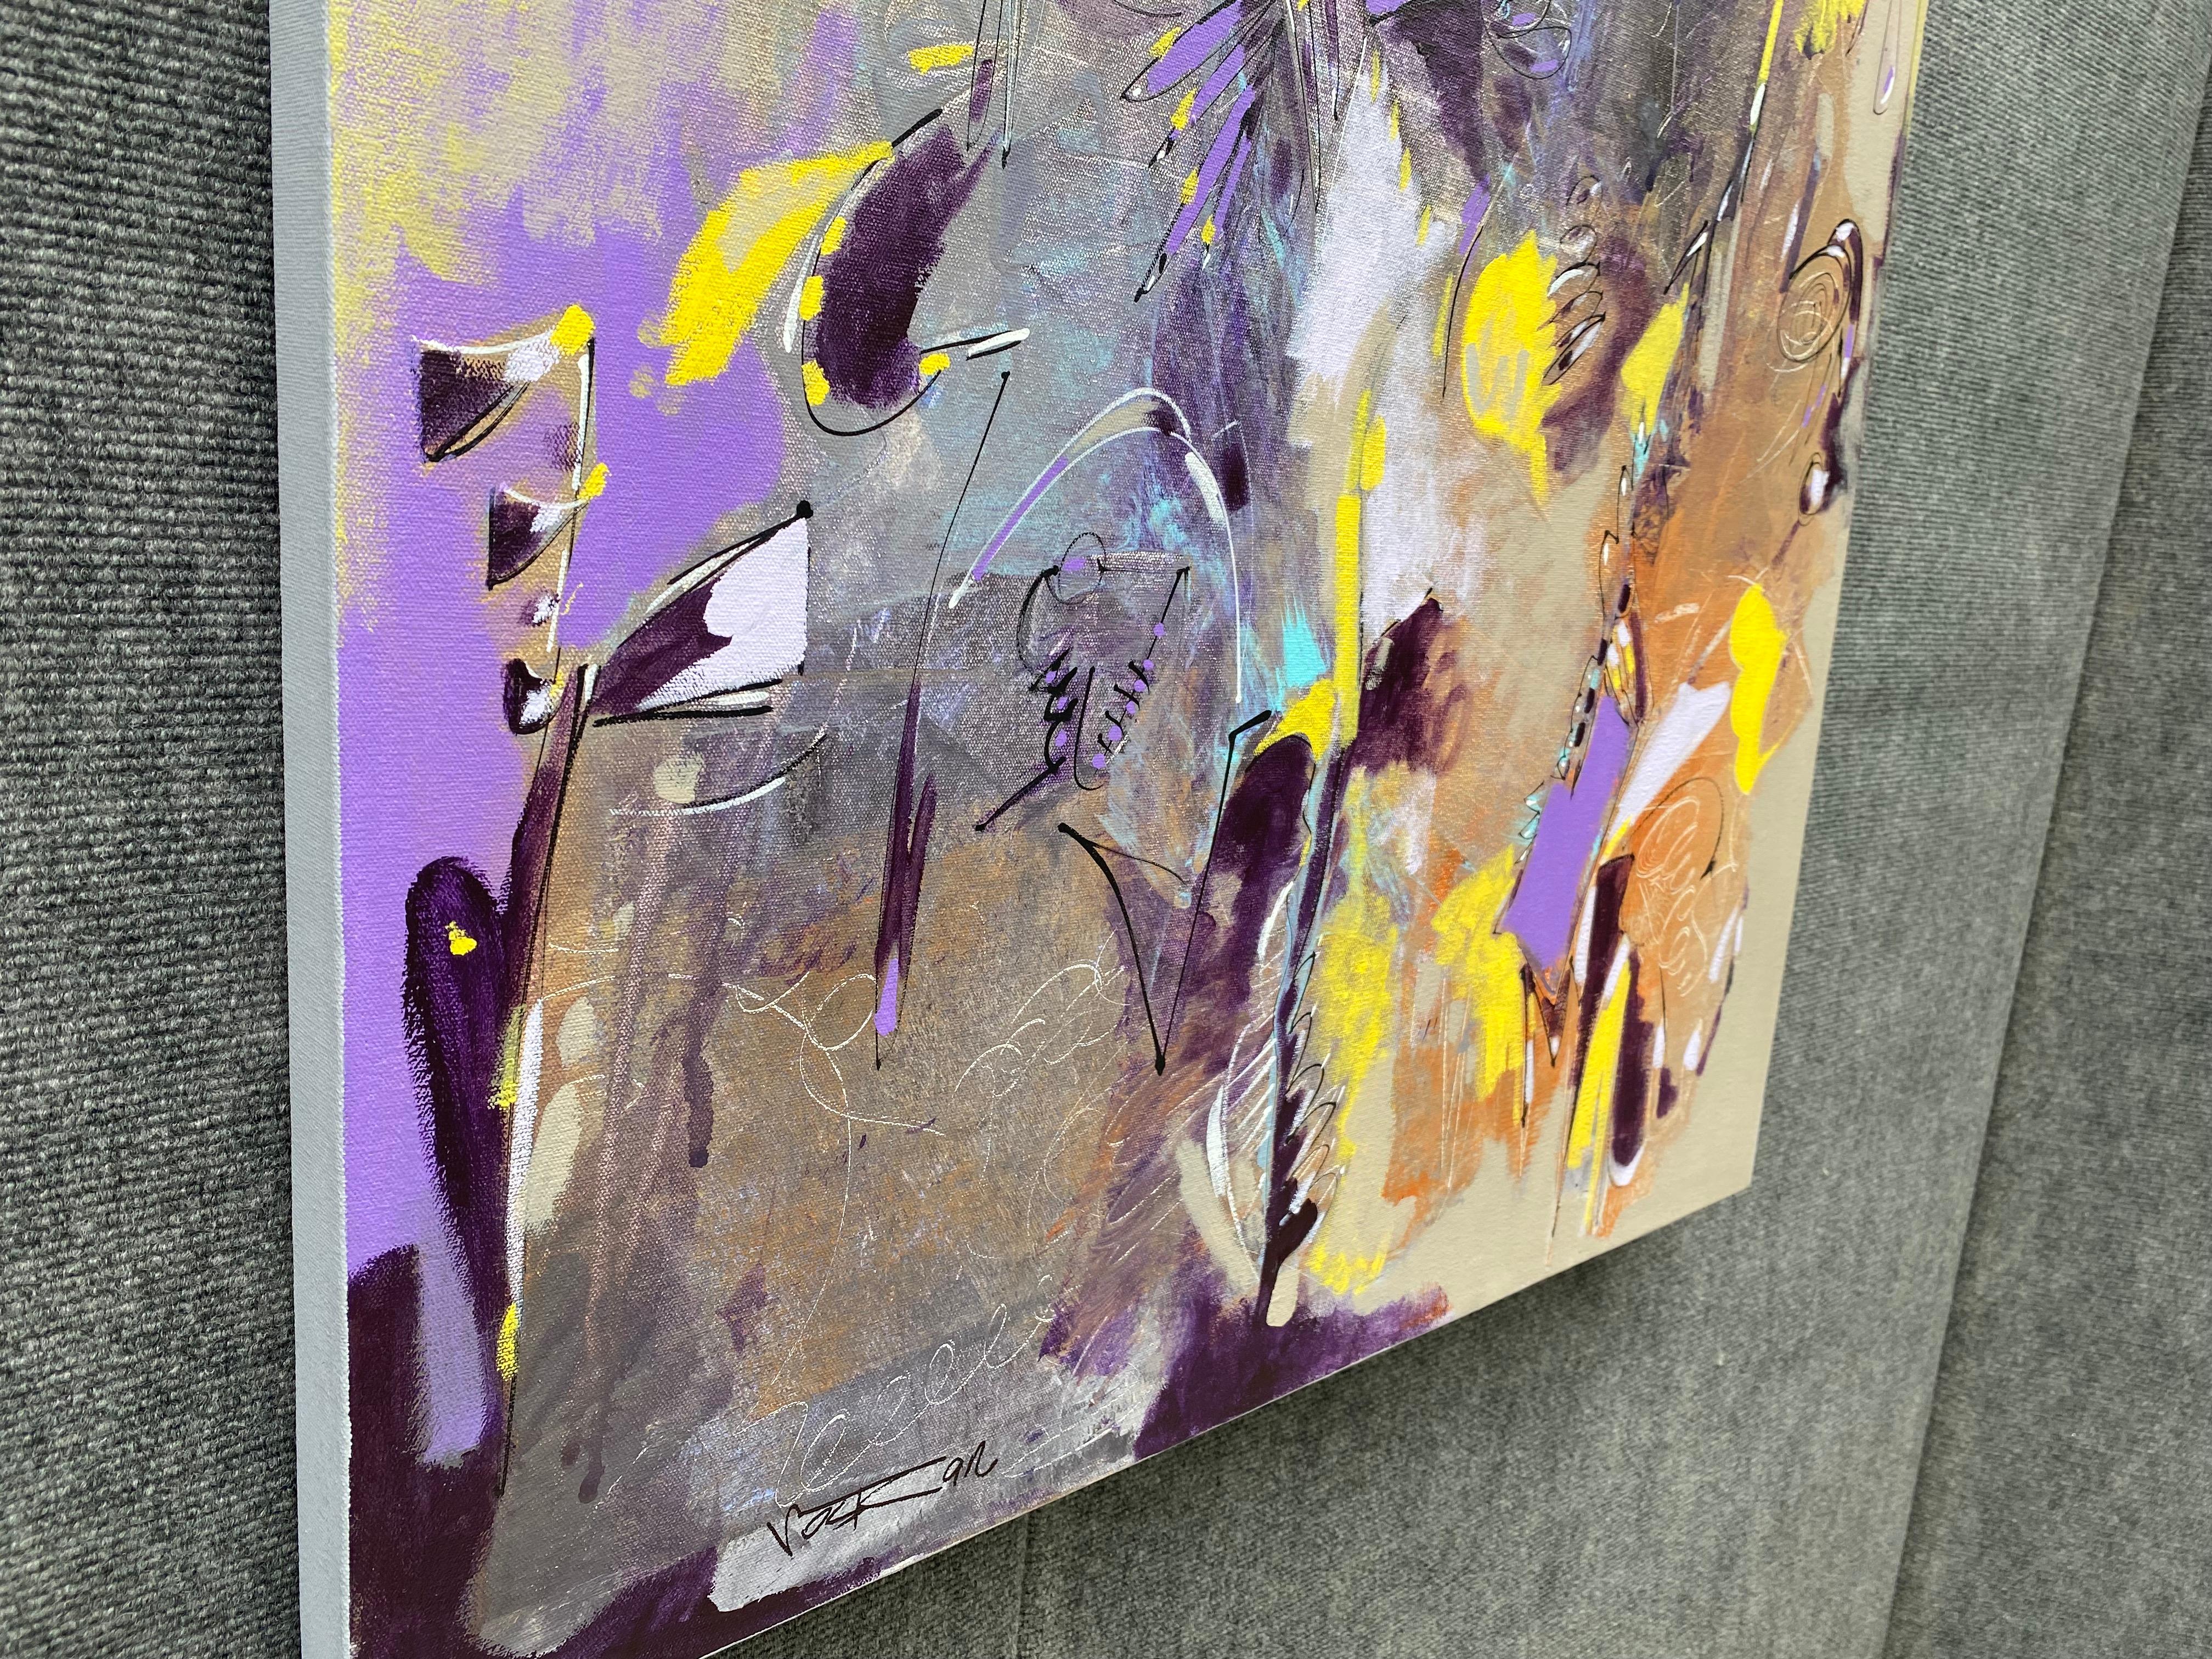 Lavender in Abstract, Original Acrylic Painting, Ready to Hang - Gray Abstract Painting by Voskan Galstian